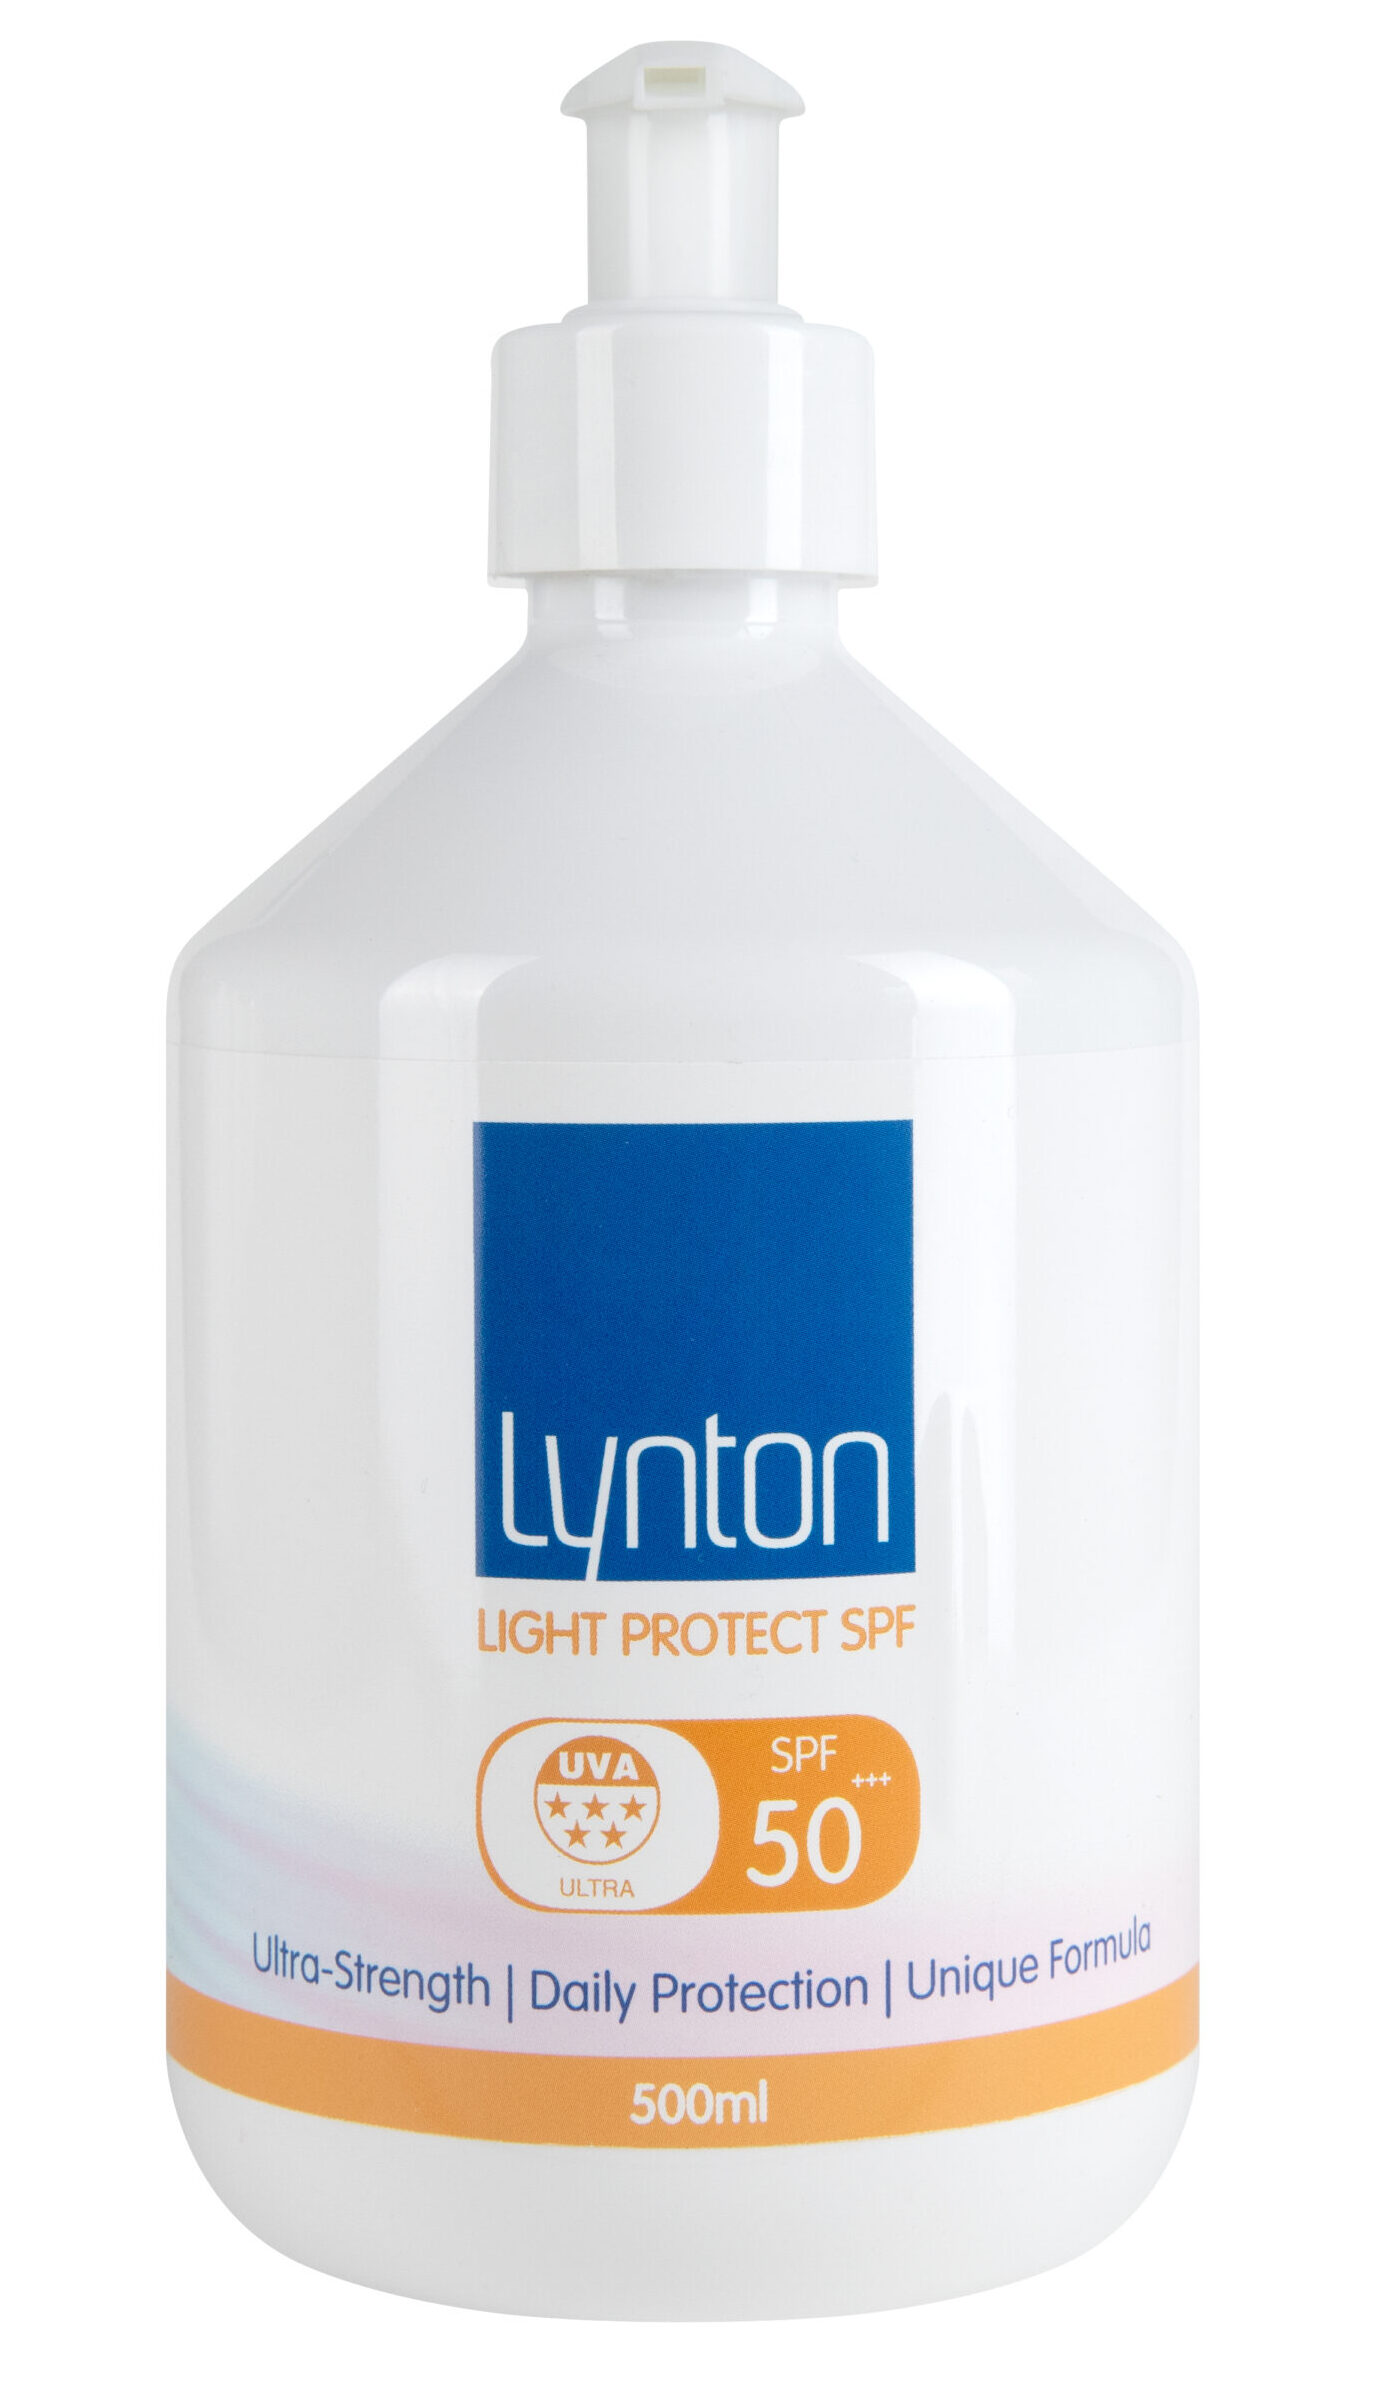 Lynton Light Protect SPF 50 Professional Only